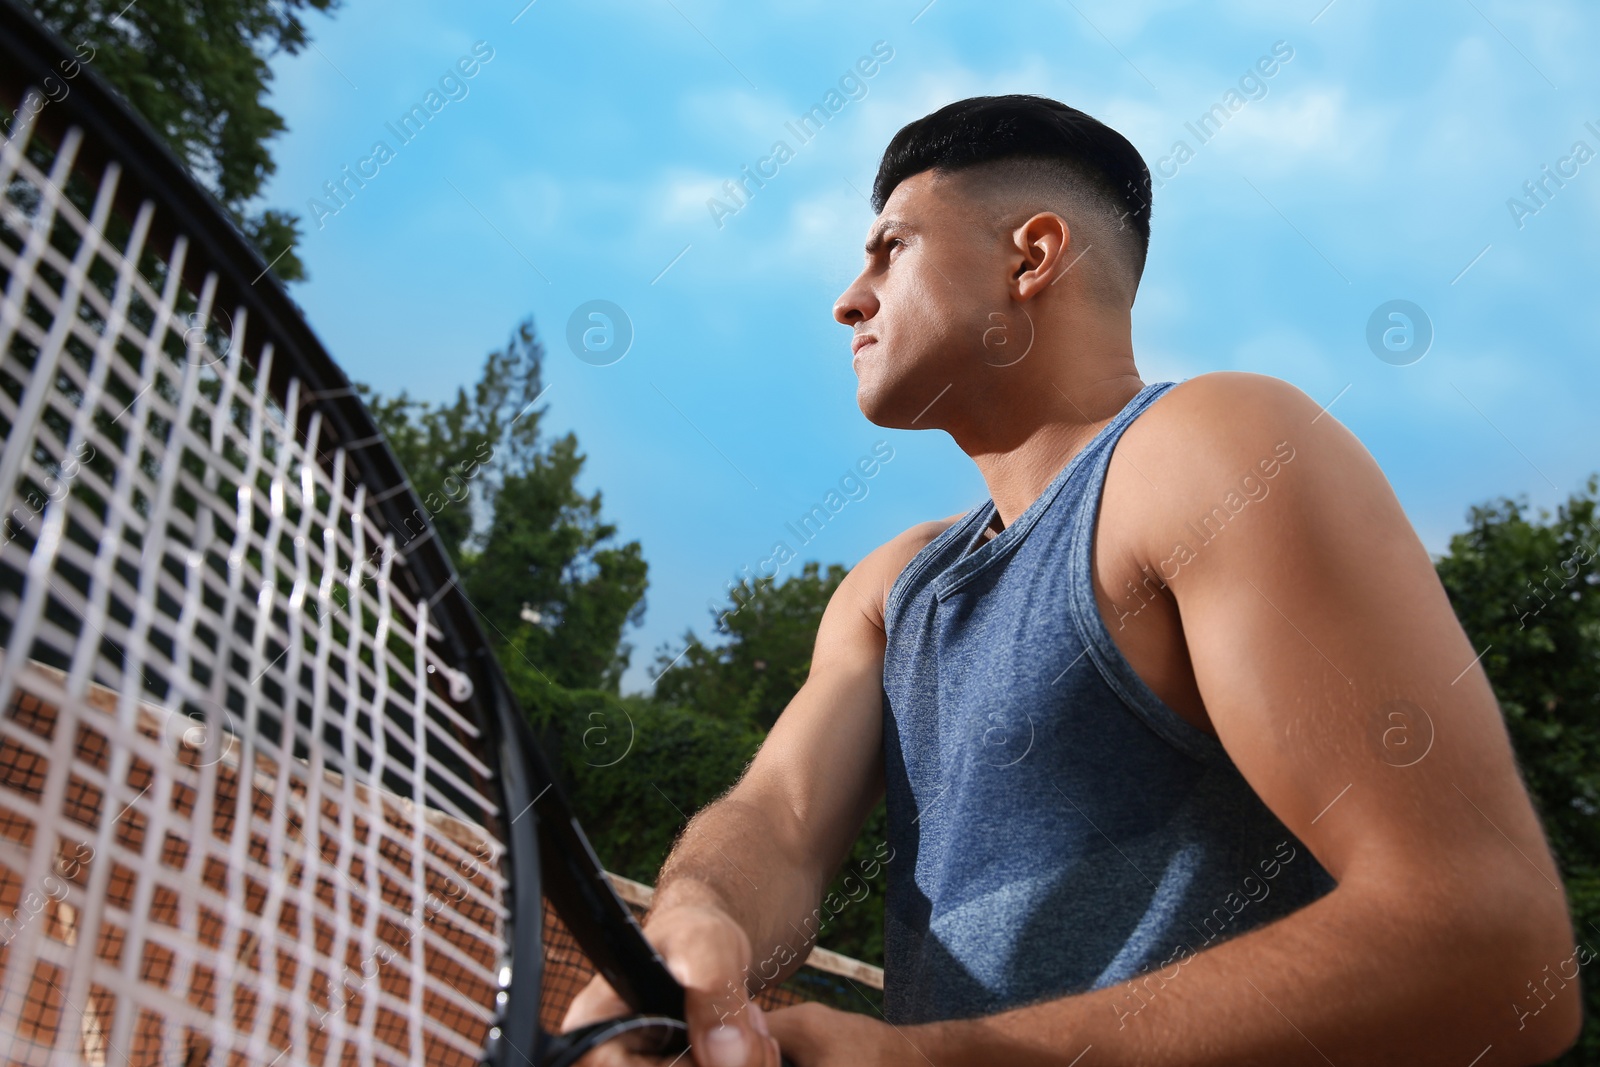 Photo of Man with tennis racket at court, low angle view